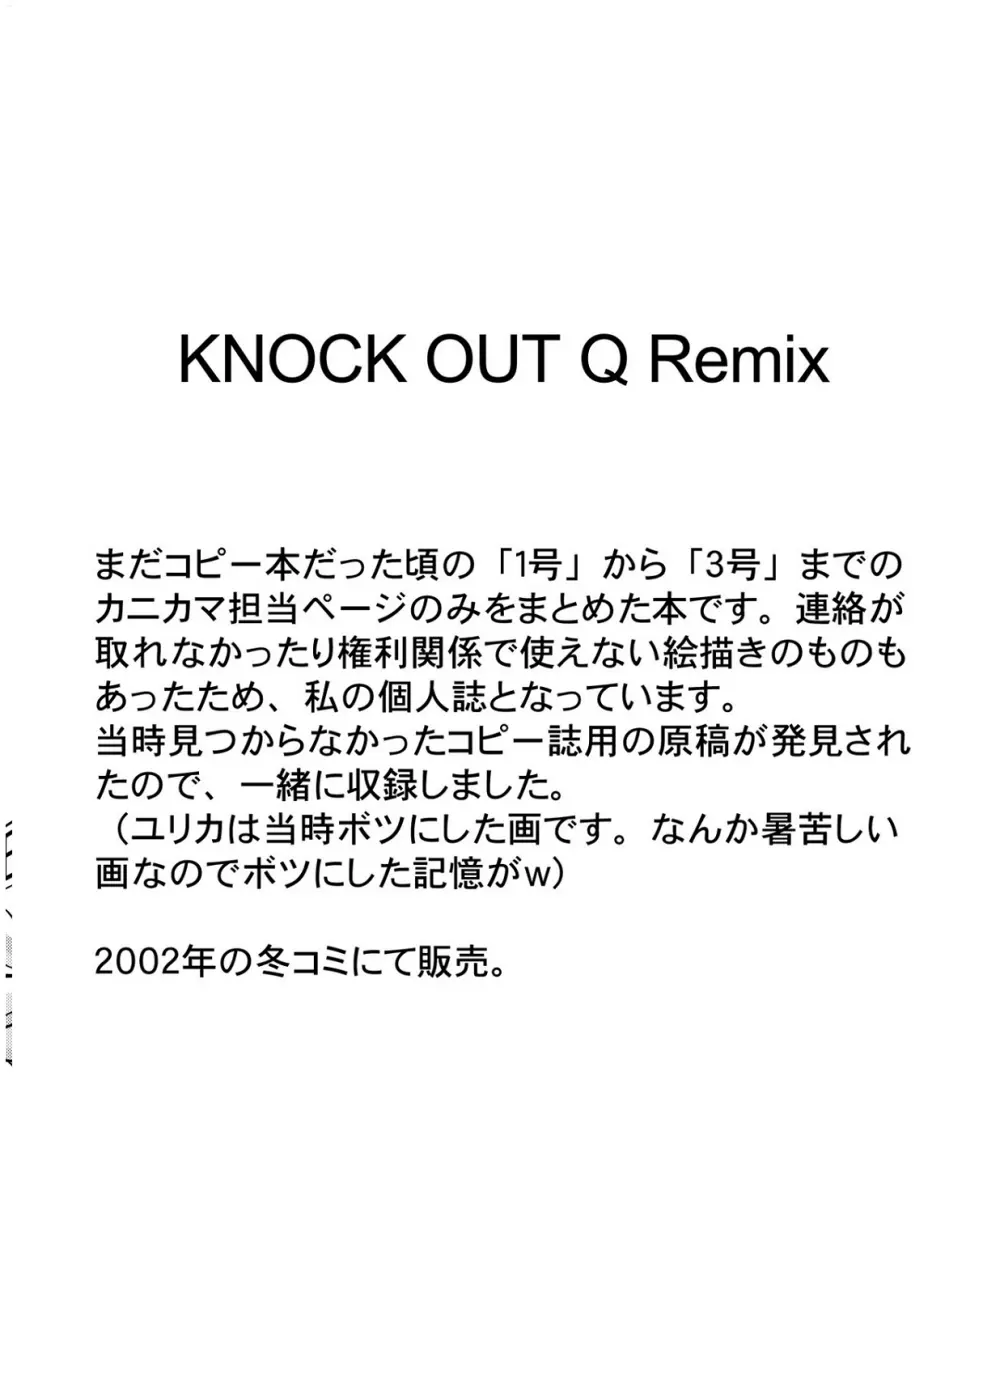 Knockout-Q 25ページ